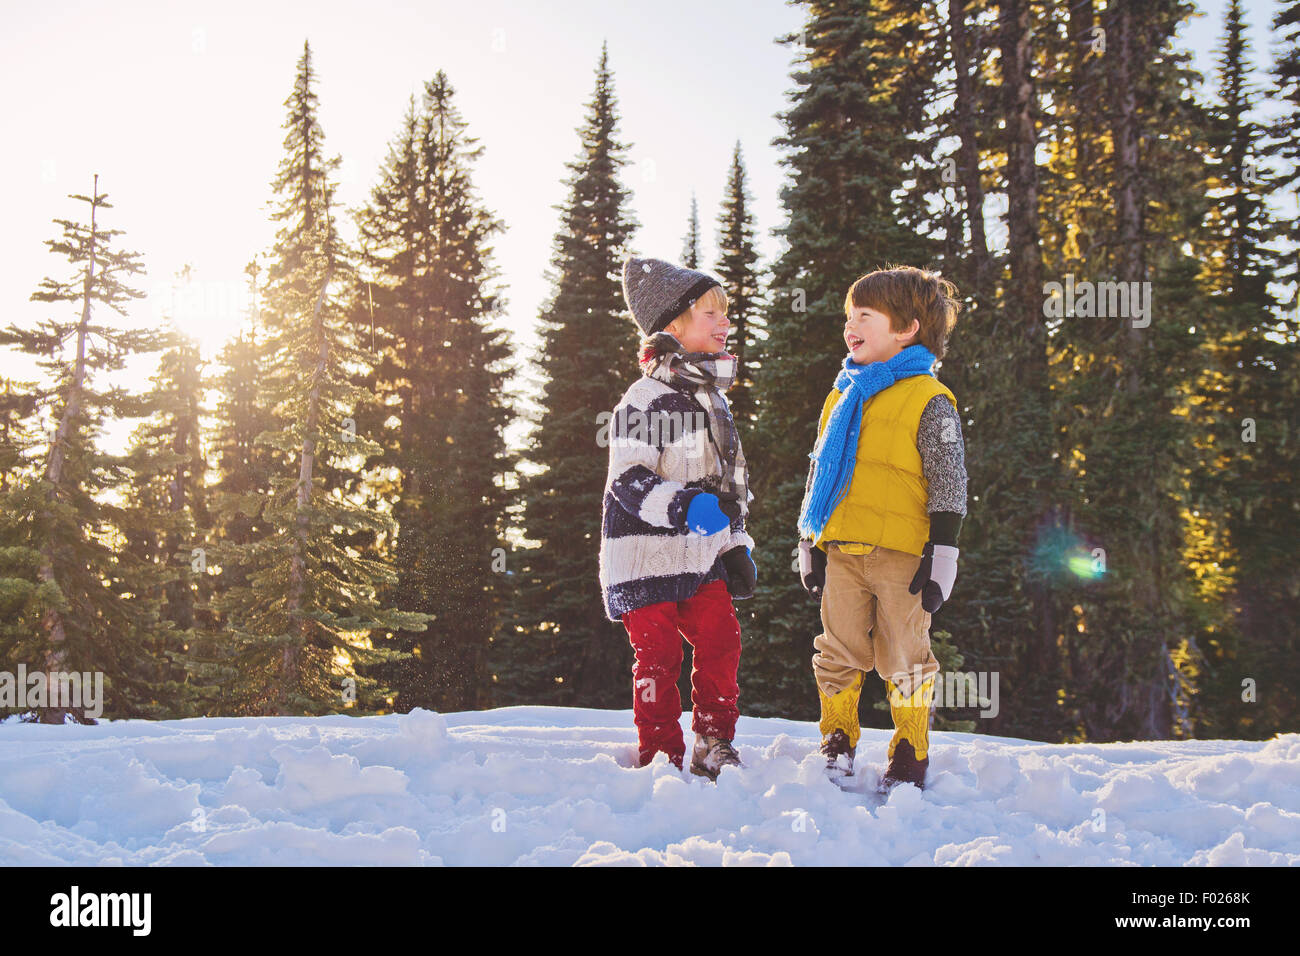 Two young boys laughing in the snow, trees in the background Stock Photo